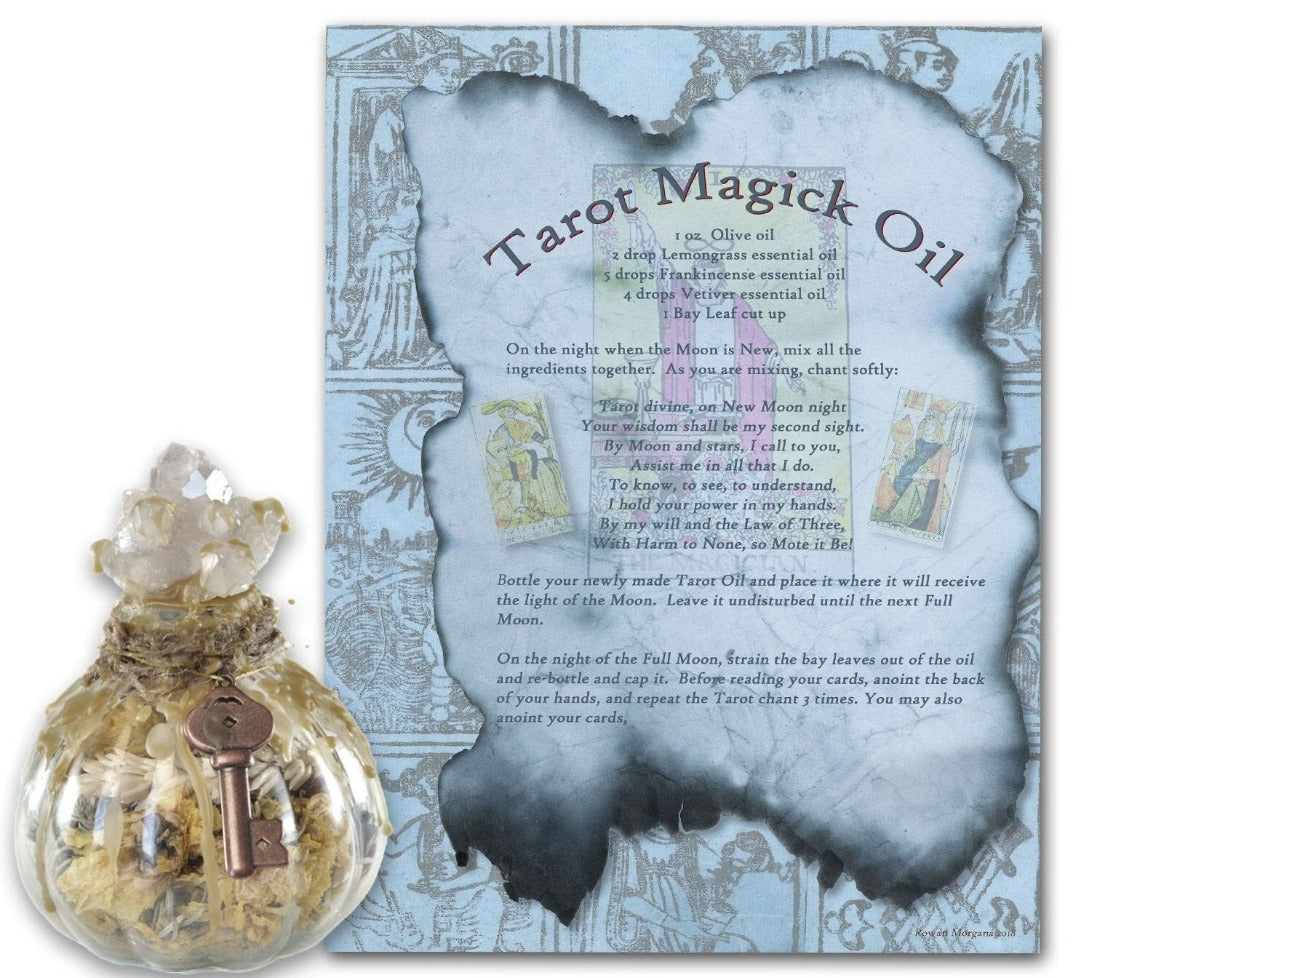 TAROT OIL Recipe, Printable Essential Oil Card Blessing, Recipe for Wicca Oracle Potion, Card Reading, Moon Spell, Grimoire Spellbook Page - Morgana Magick Spell